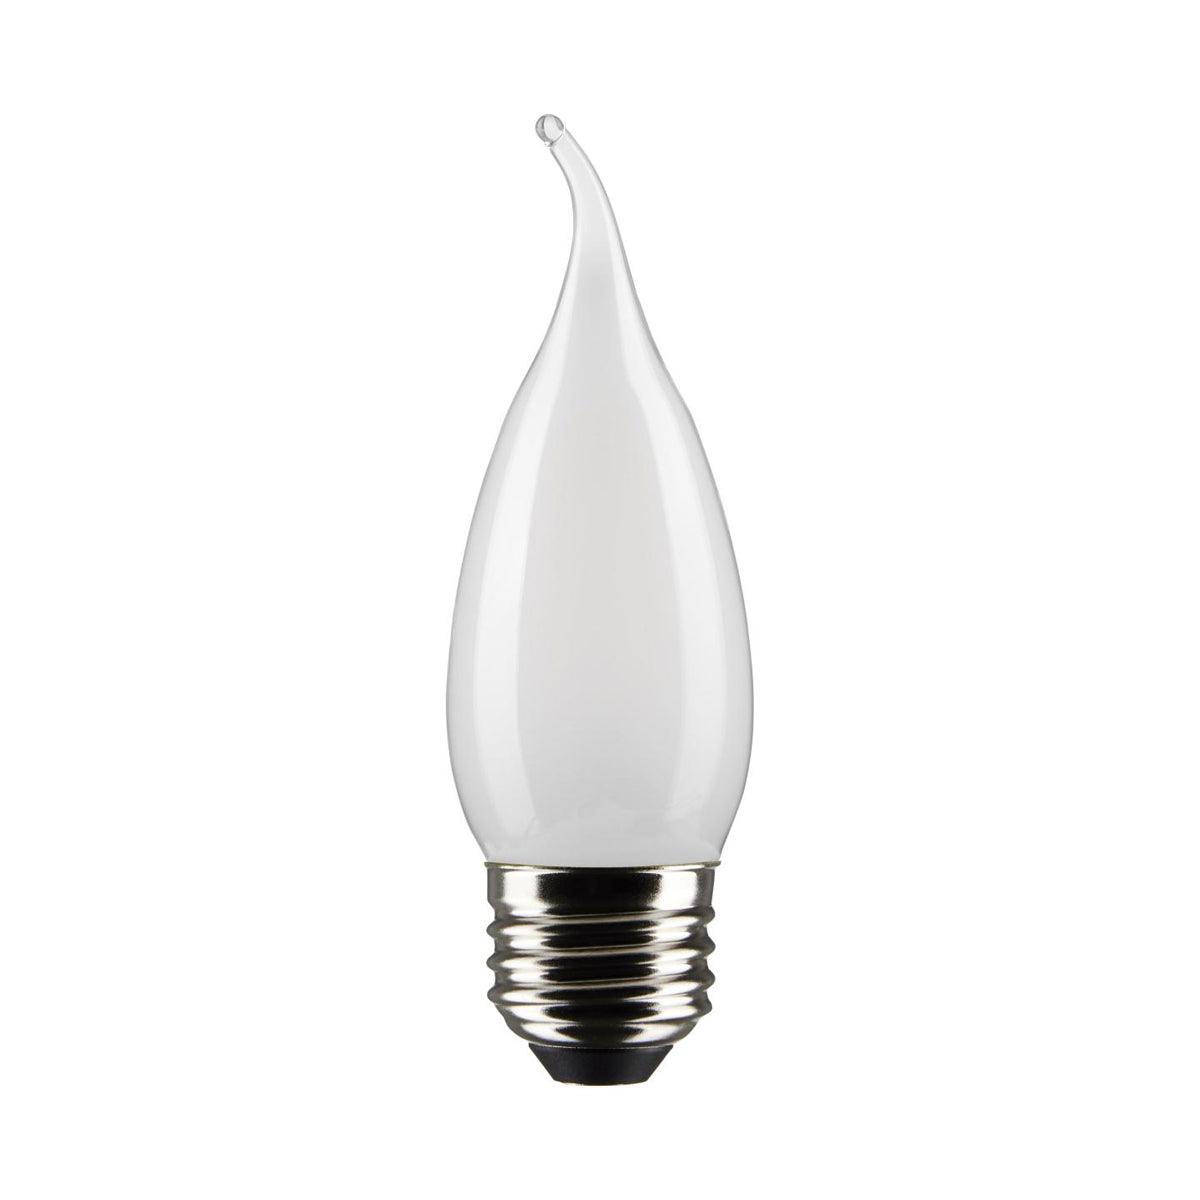 CA10 Candle LED Bulb, 60W Equivalent,6 Watt, 500 Lumens, 2700K, E26 Medium Base, Frosted Finish, Pack Of 2 - Bees Lighting